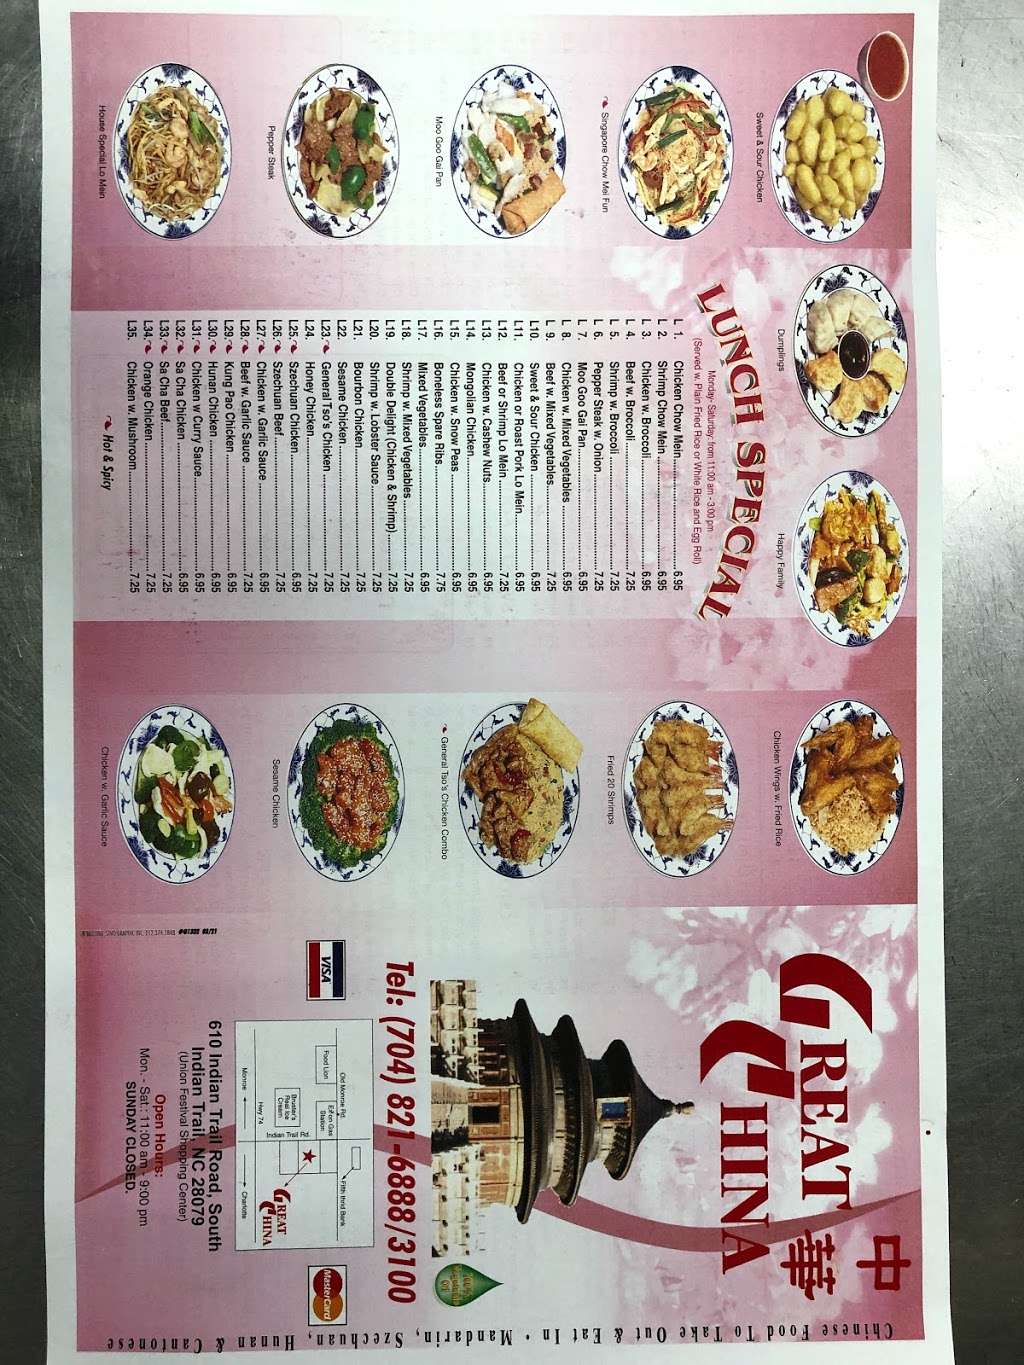 Great China | 610 Indian Trail Rd, Indian Trail, NC 28079, USA | Phone: (704) 821-6888